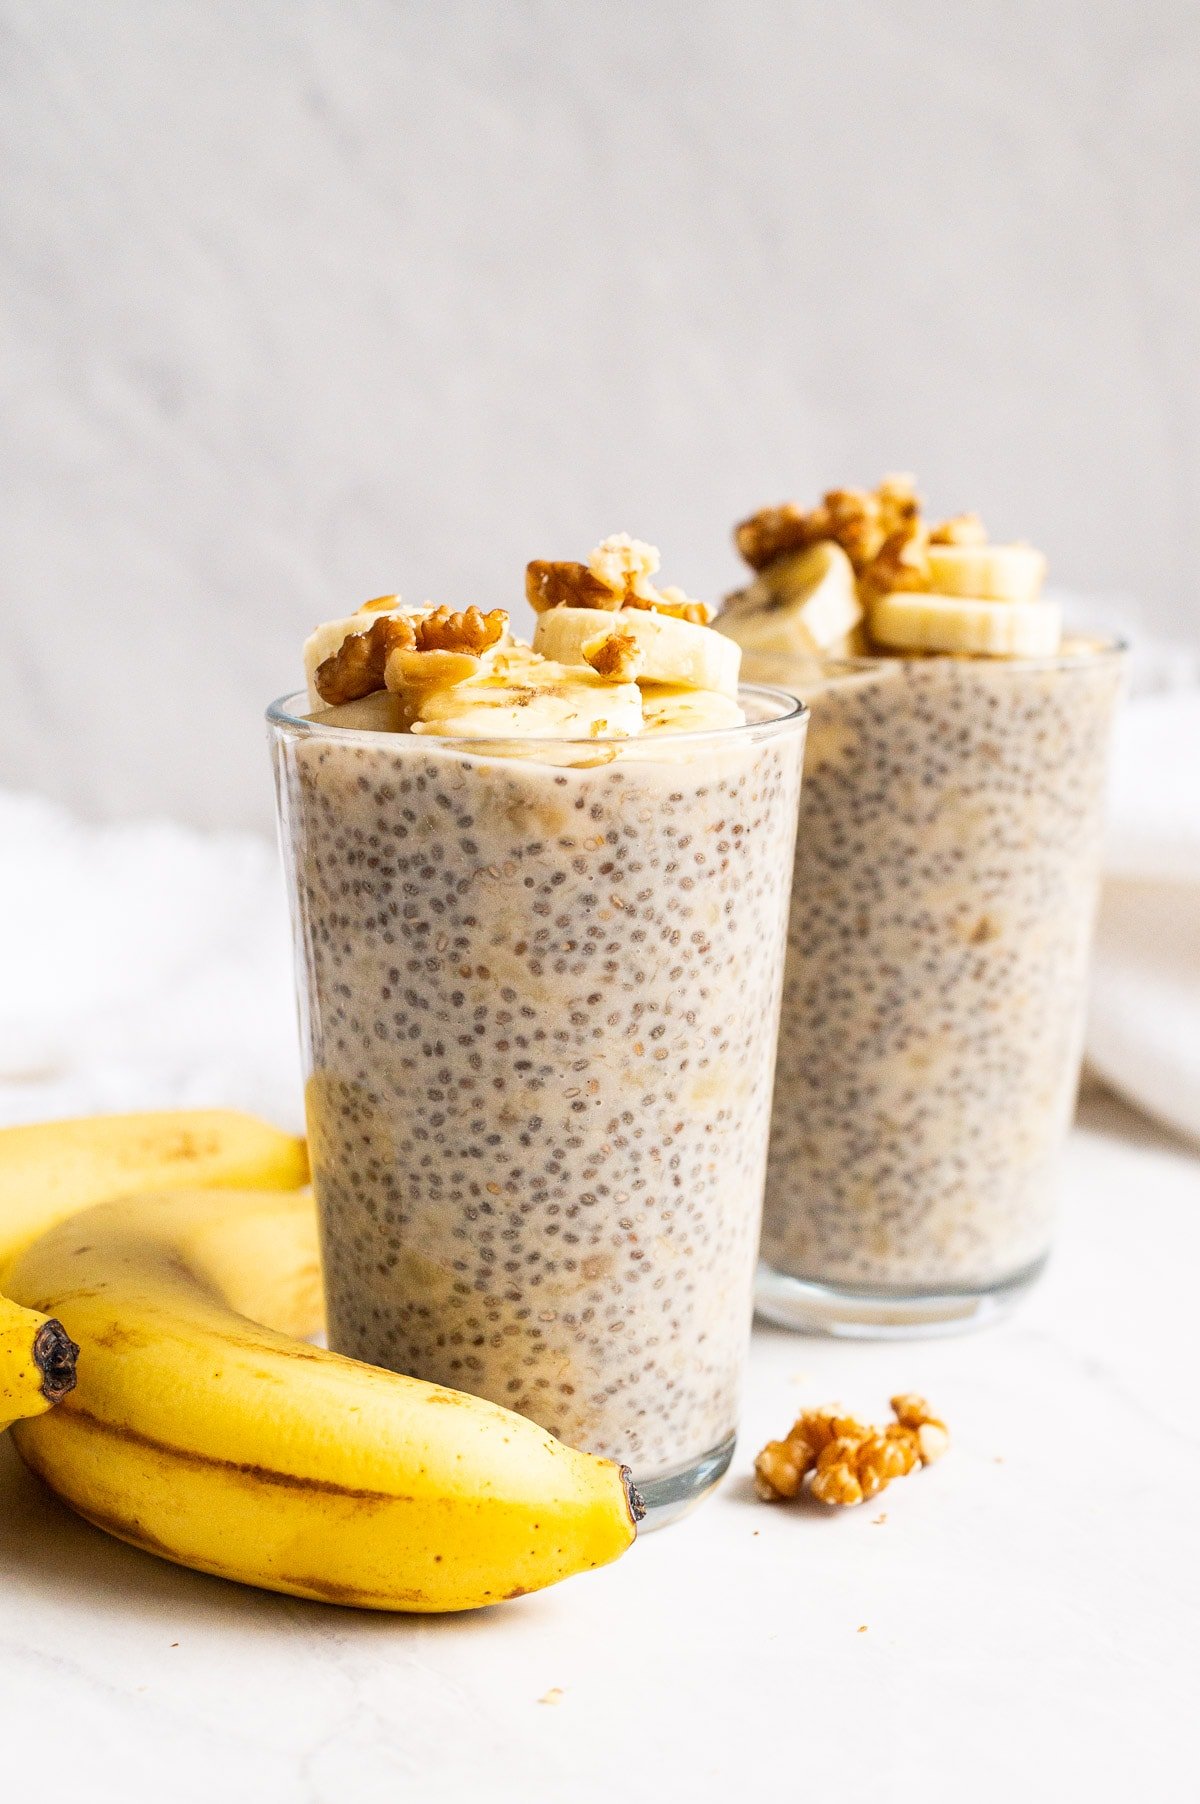 Banana chia pudding topped with sliced bananas and walnuts served in glasses.